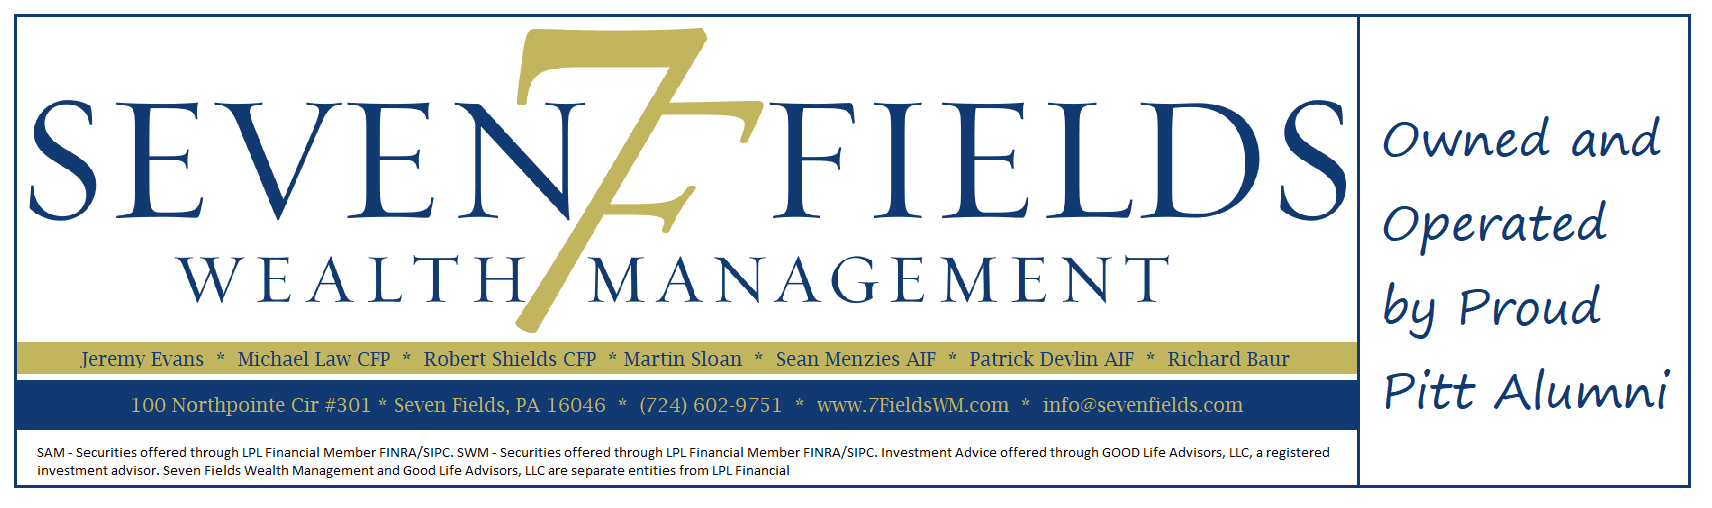 Pitt gameday coverage on PSN is sponsored by 7 Fields Wealth Management